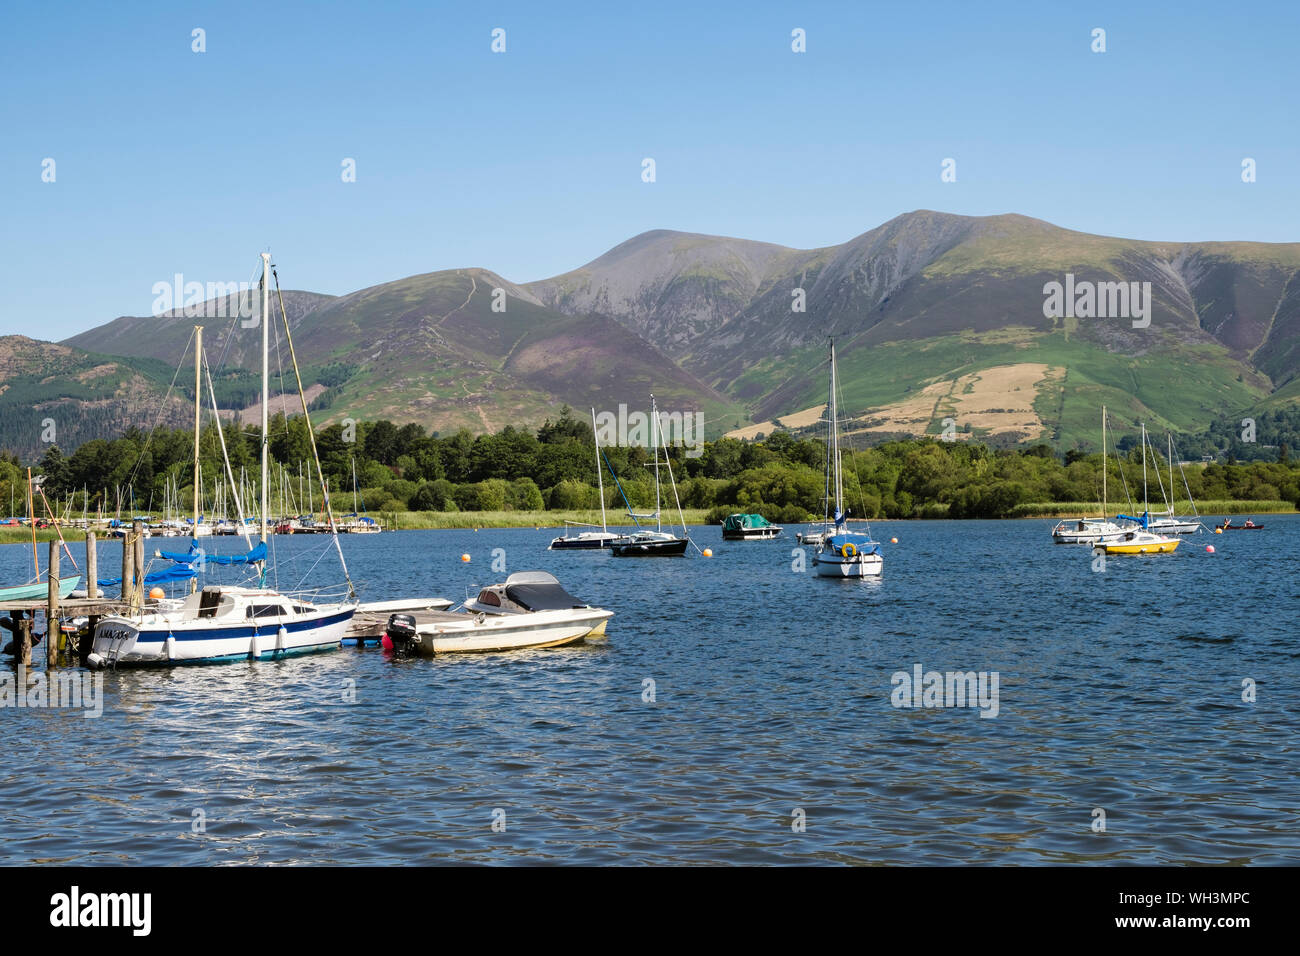 Boats on Derwentwater with Skiddaw mountain as backdrop in Lake District National Park. Nichol End, Keswick, Cumbria, England, UK, Britain Stock Photo